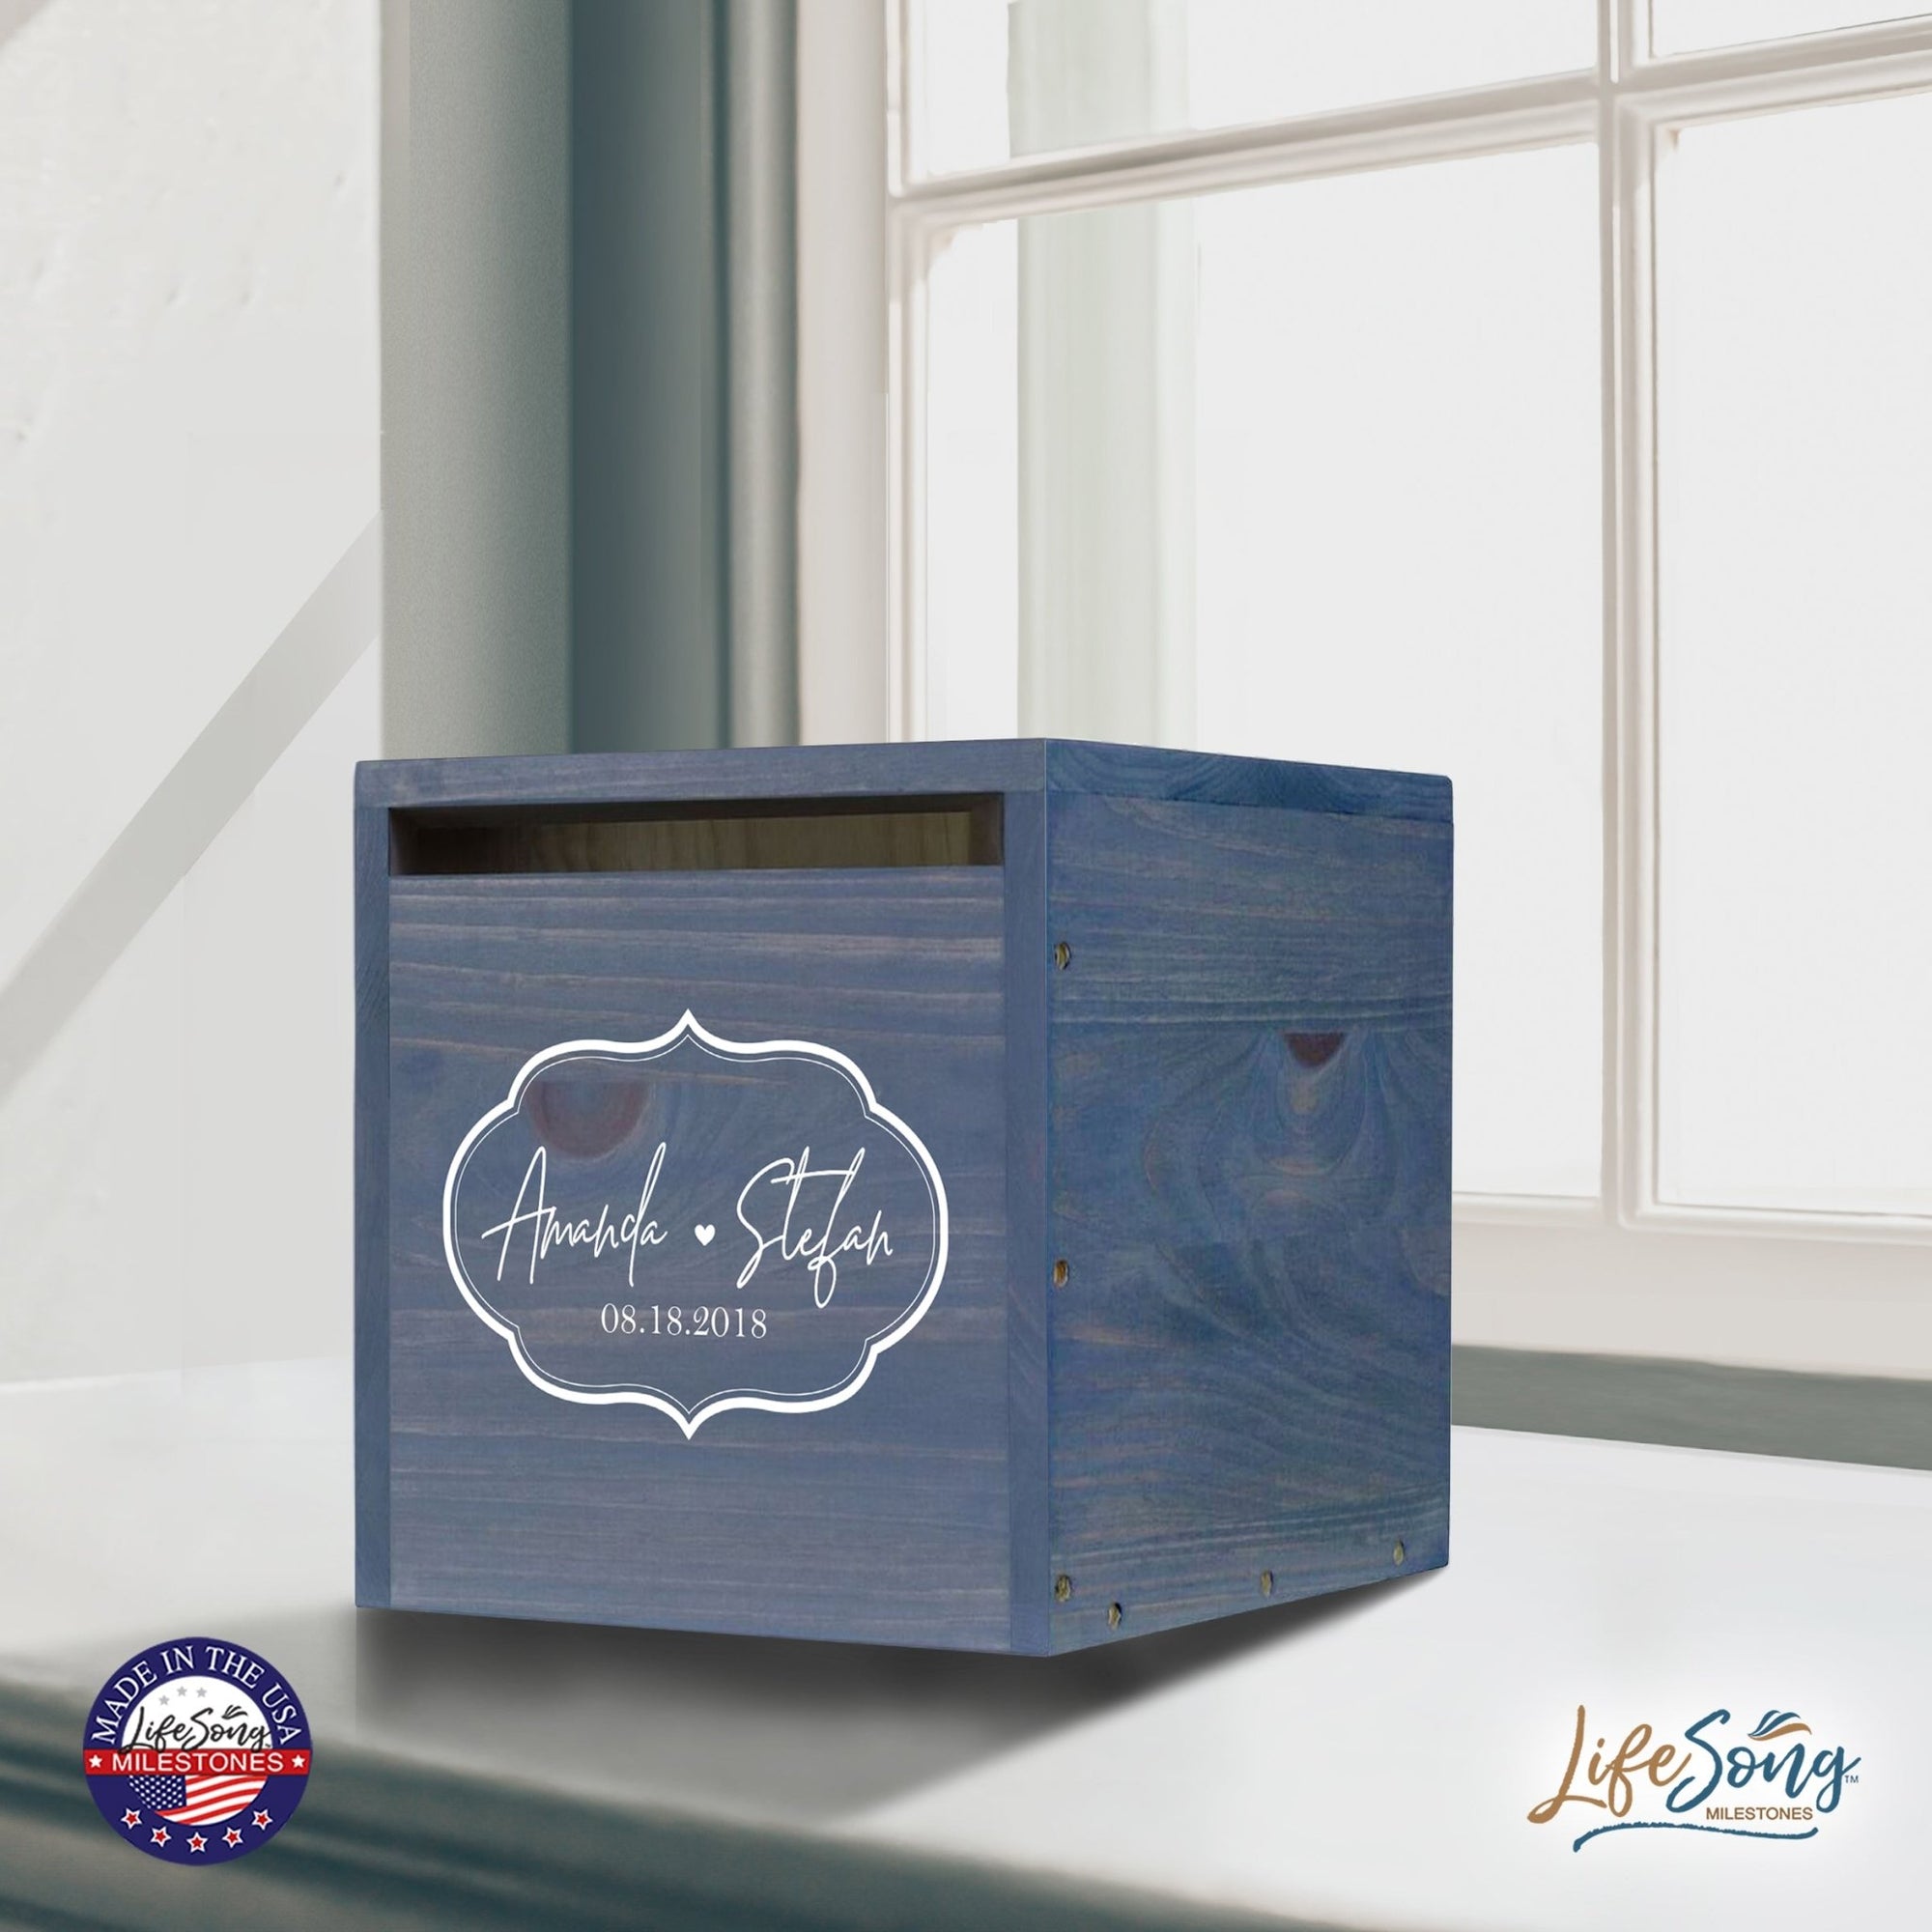 Personalized Wooden Card Box for Wedding Ceremonies, Venues, Receptions, Bridal Showers, and Engagement Parties 13.5x12 - Amanda & Stefan (Borders) - LifeSong Milestones